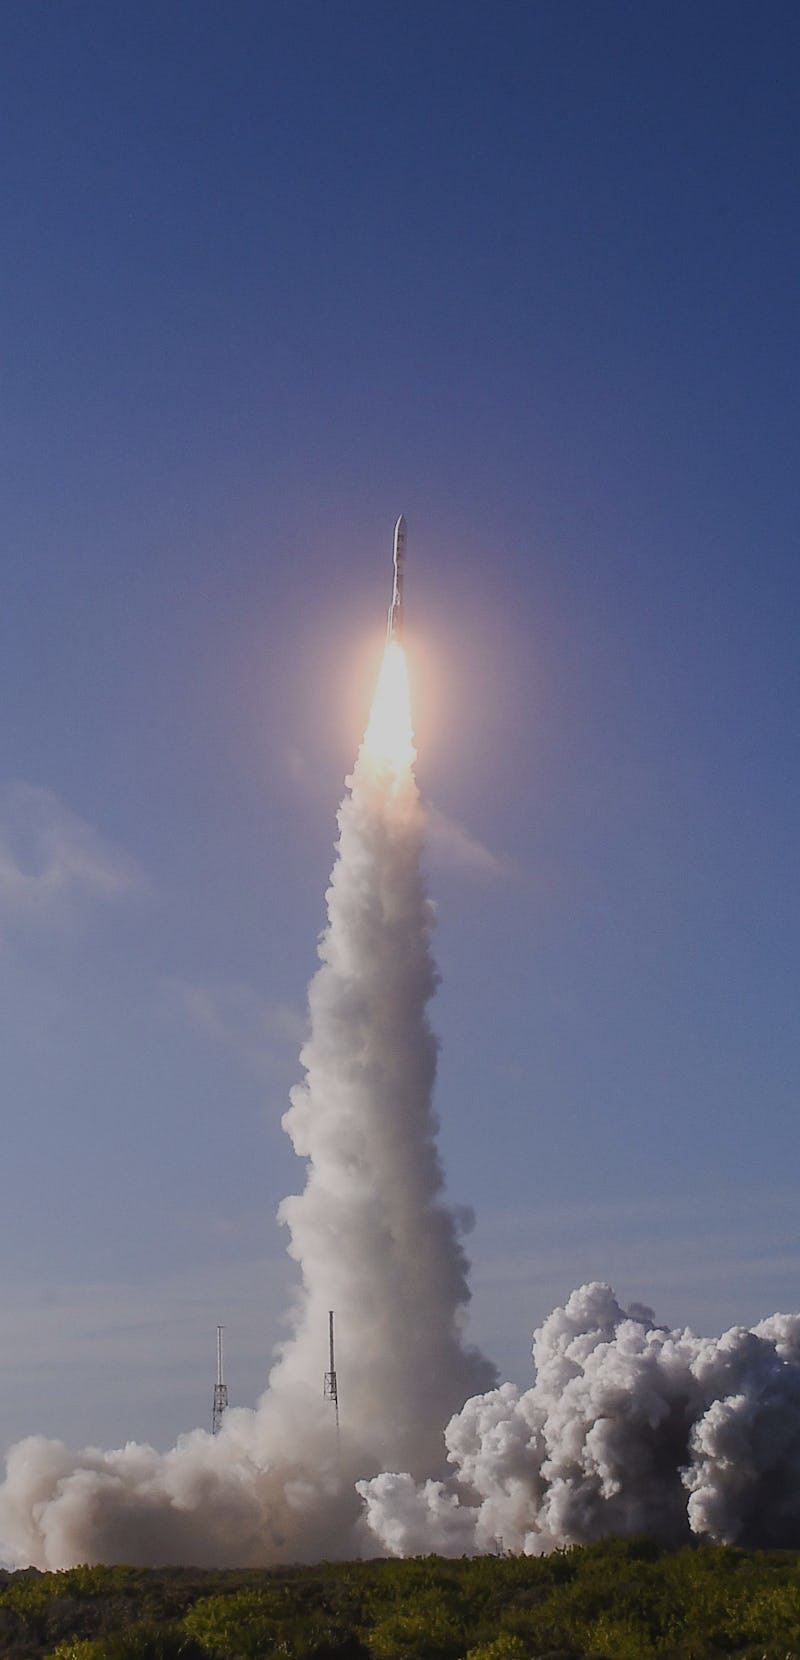 The Atlas V rocket carrying the GOES-T weather satellite launches from the Space Launch Complex 41 i...